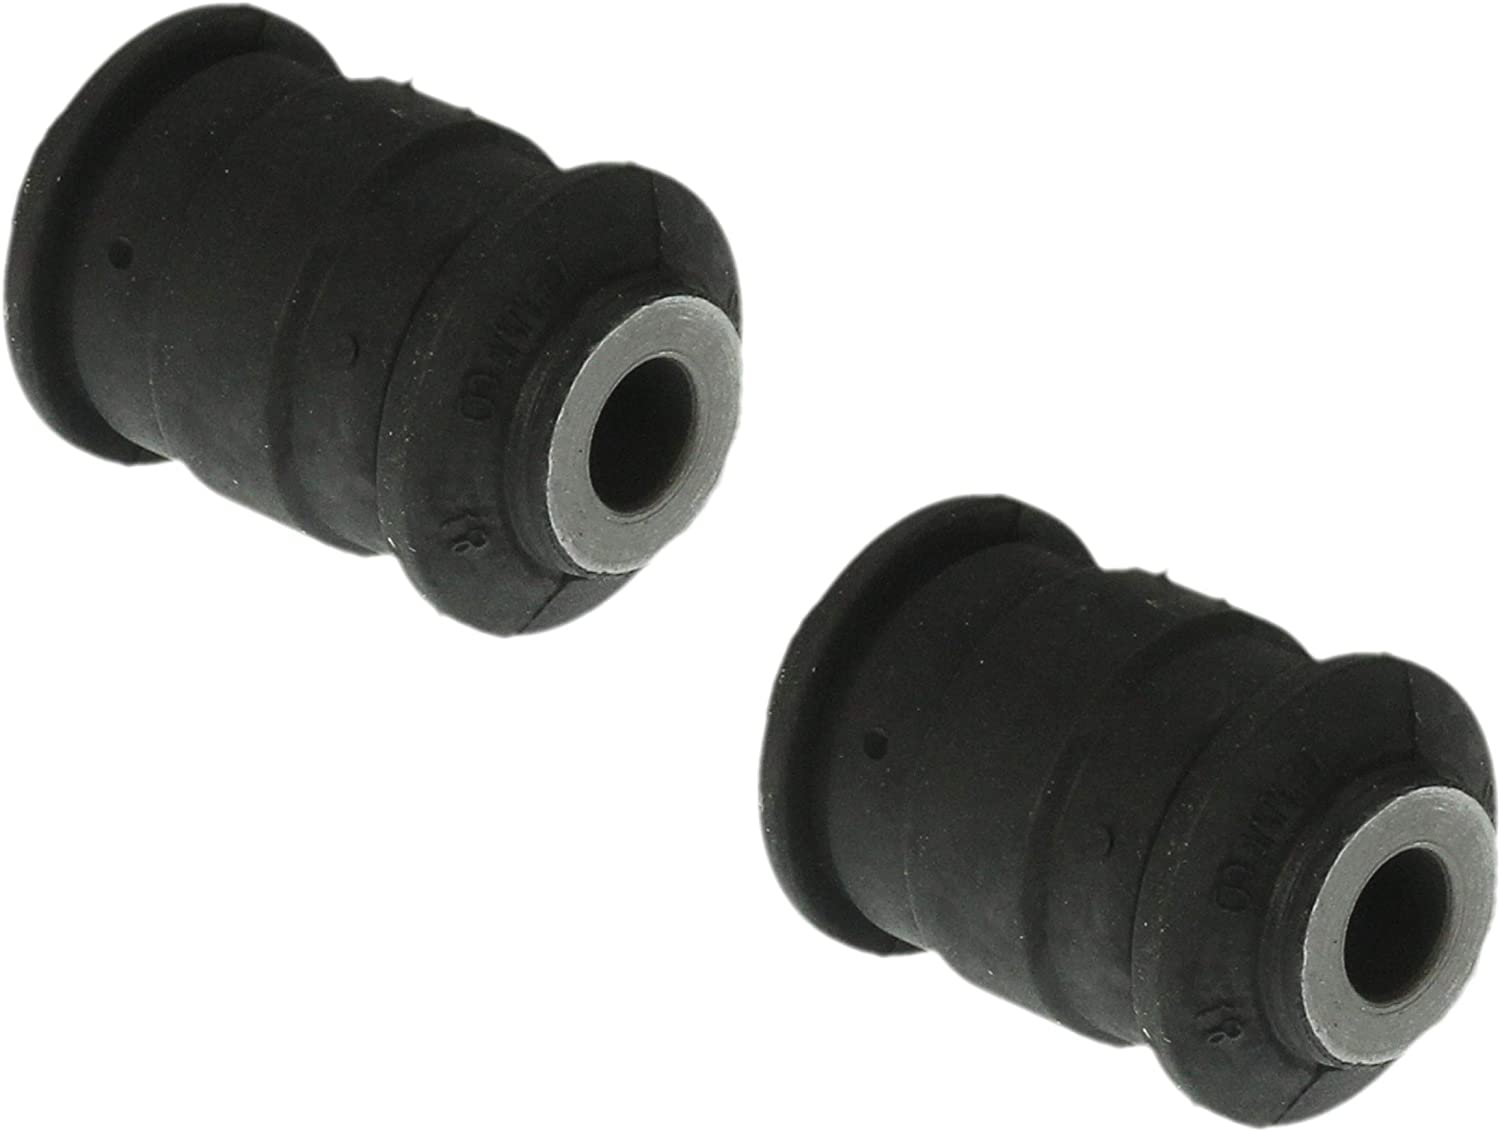 Set 2 Front Lower Forward Control Arm Bushings for Escape Tribude Mariner